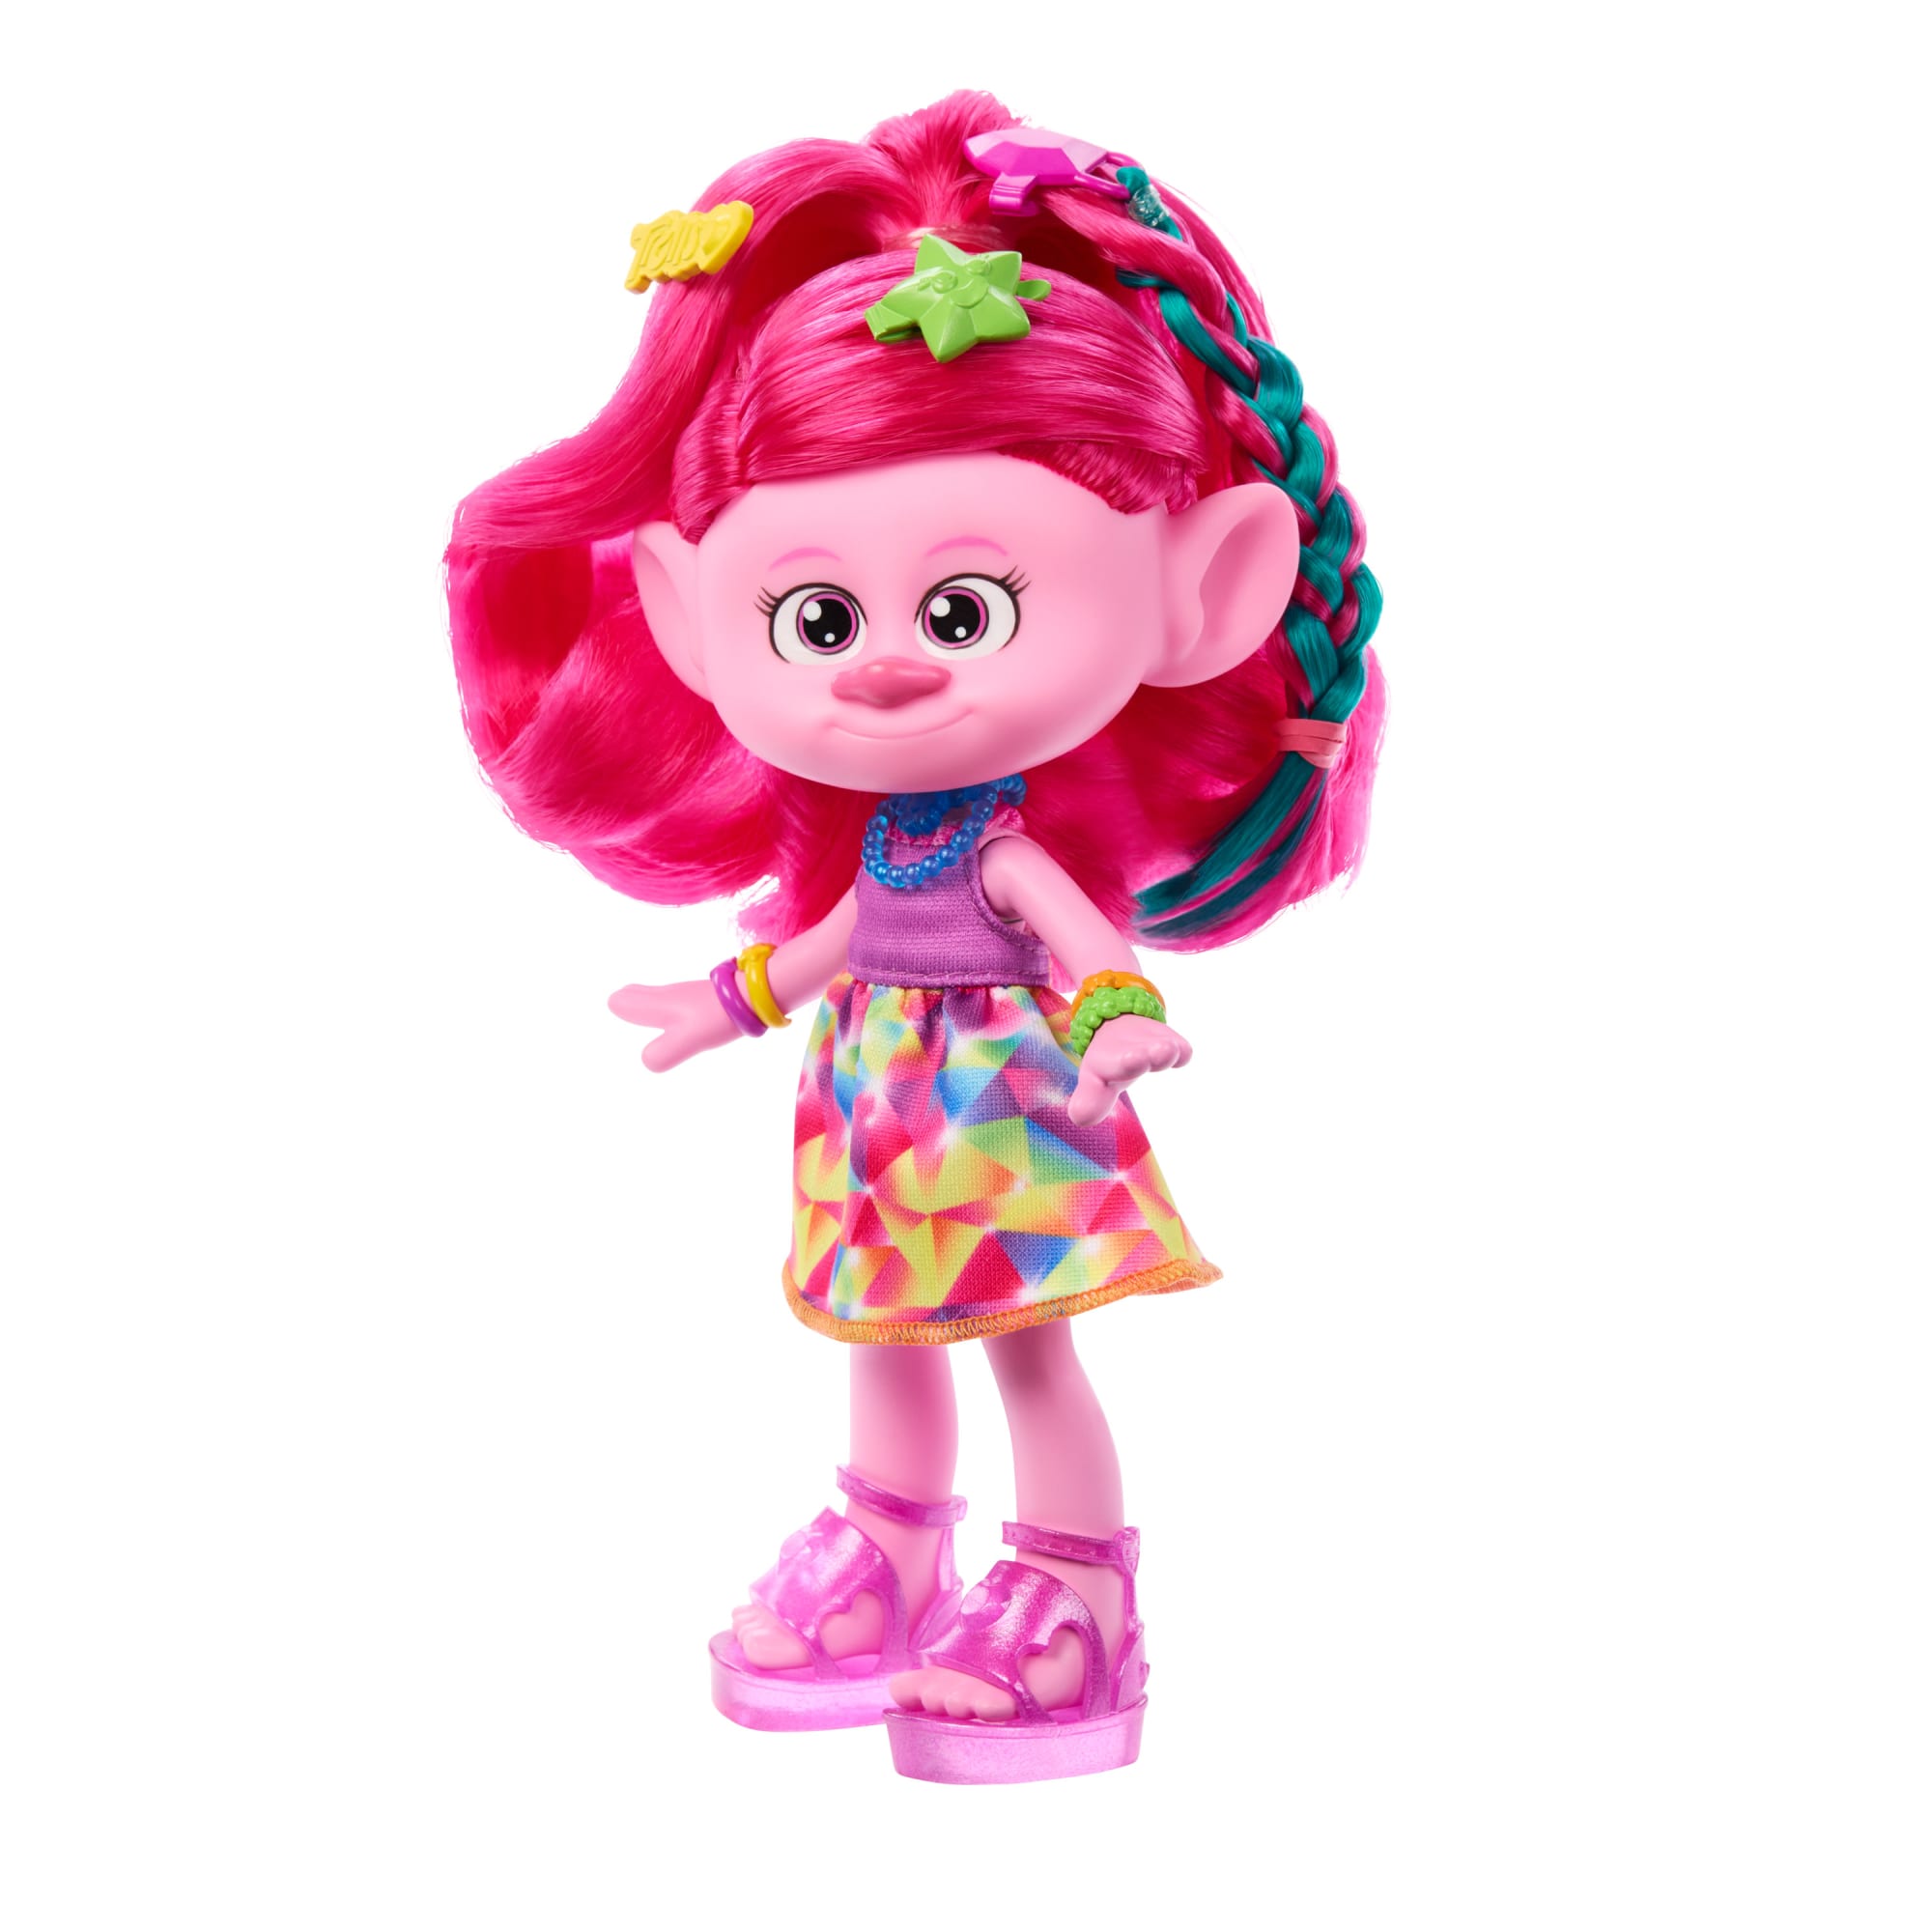  Trolls DreamWorks Glam Poppy Fashion Doll with Dress, Shoes,  and More, Inspired by The Movie World Tour, Toy for Girl 4 Years and Up :  Toys & Games